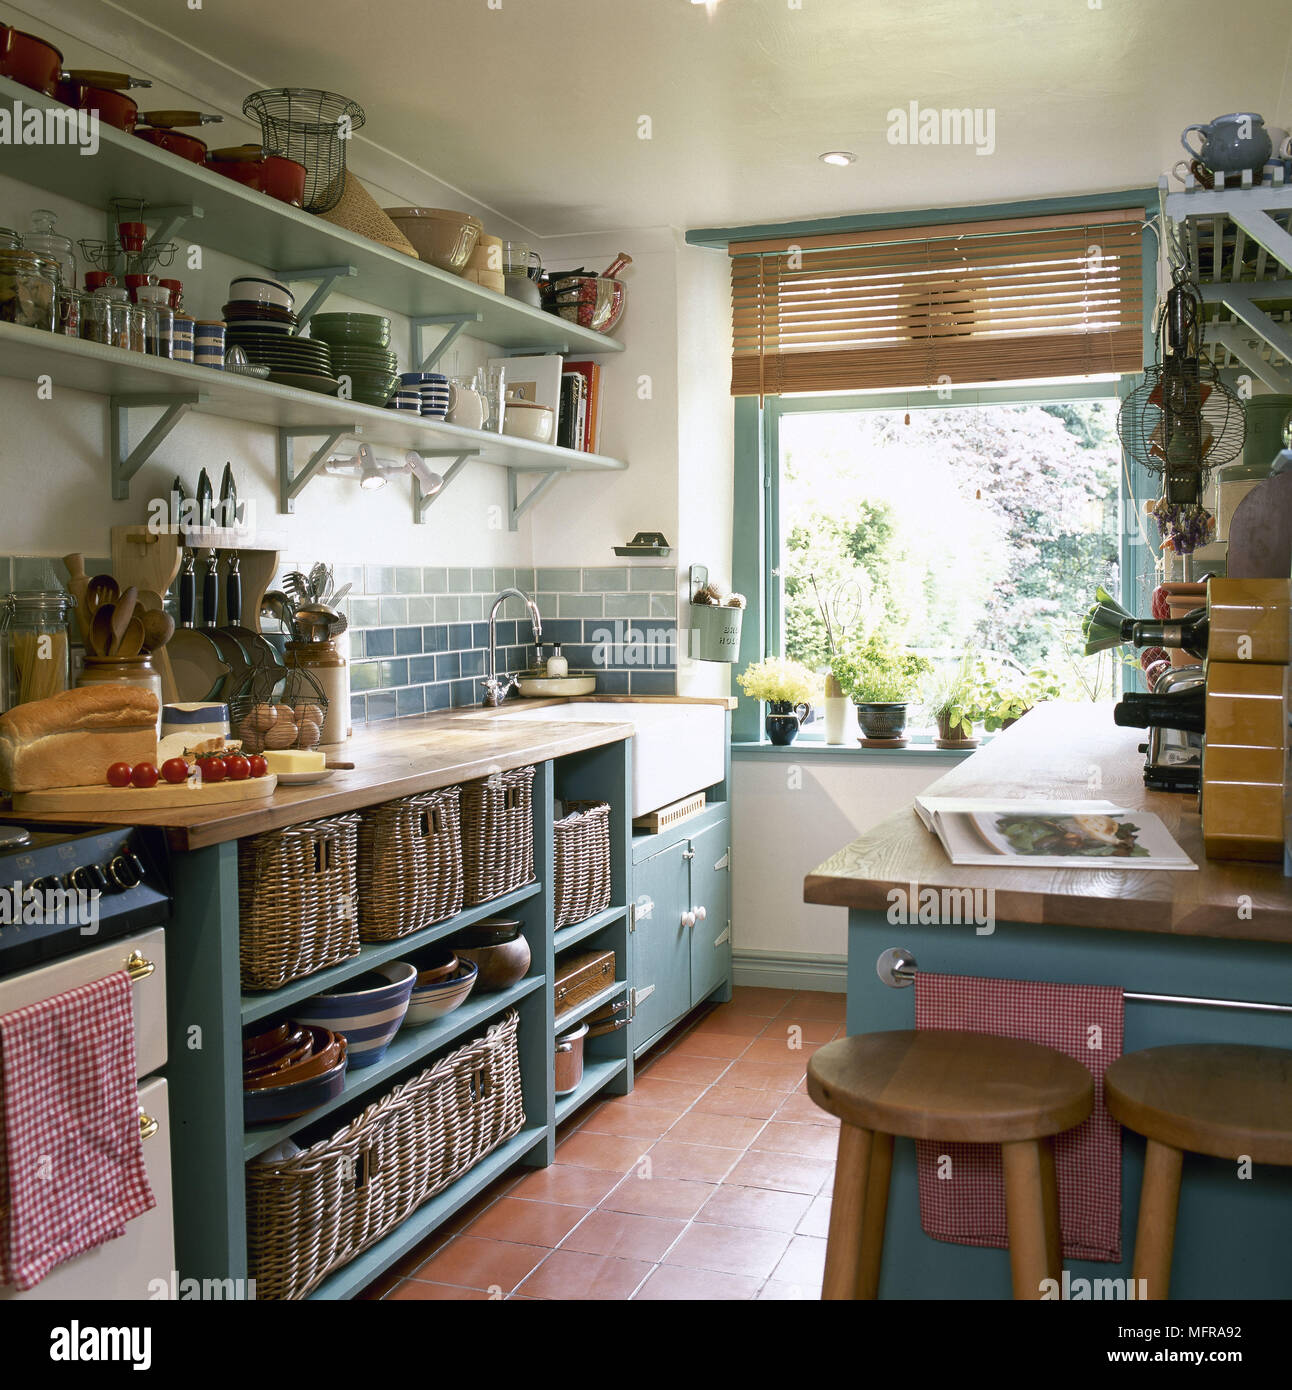 Traditional Country Kitchen Green Units Red Quarry Tiled Floor Breakfast Bar Open Shelving Belfast Sink MFRA92 